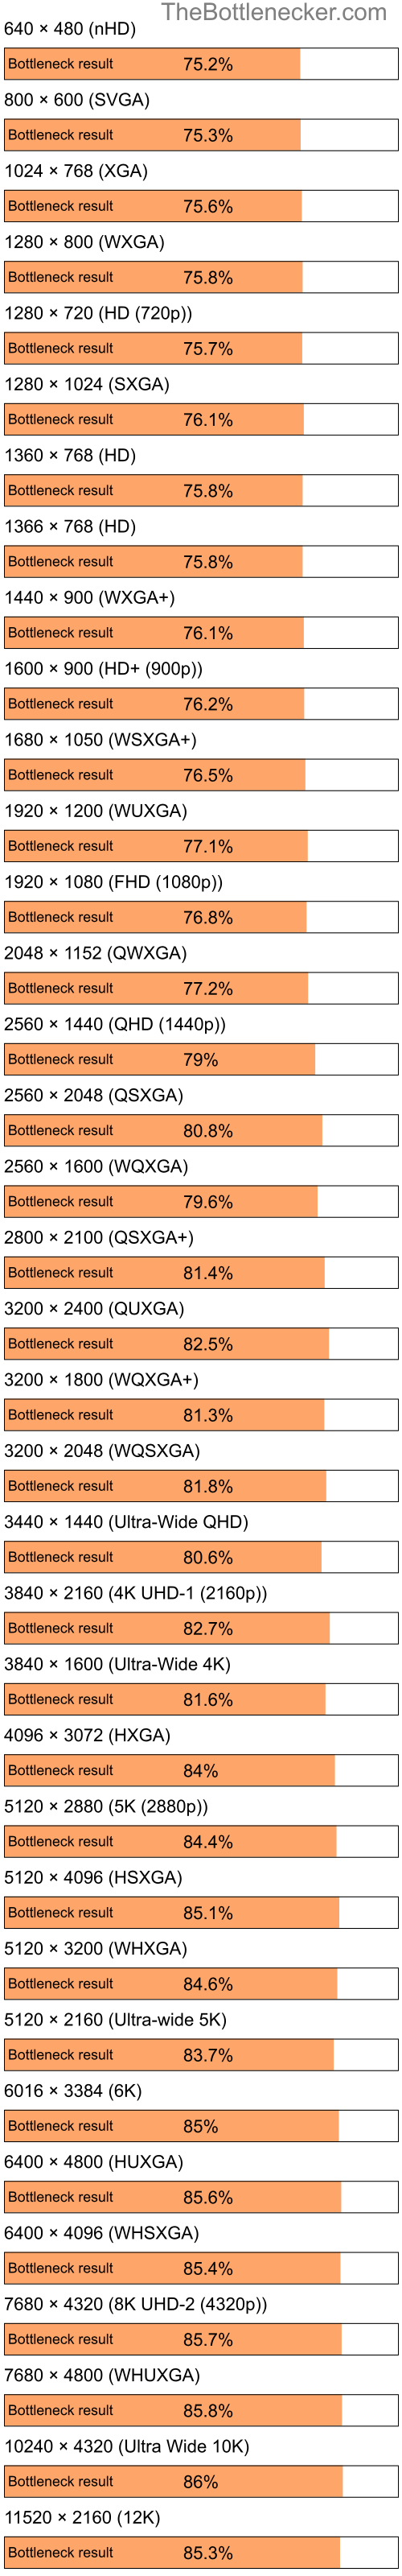 Bottleneck results by resolution for Intel Celeron M 410 and AMD Mobility Radeon X300 in General Tasks